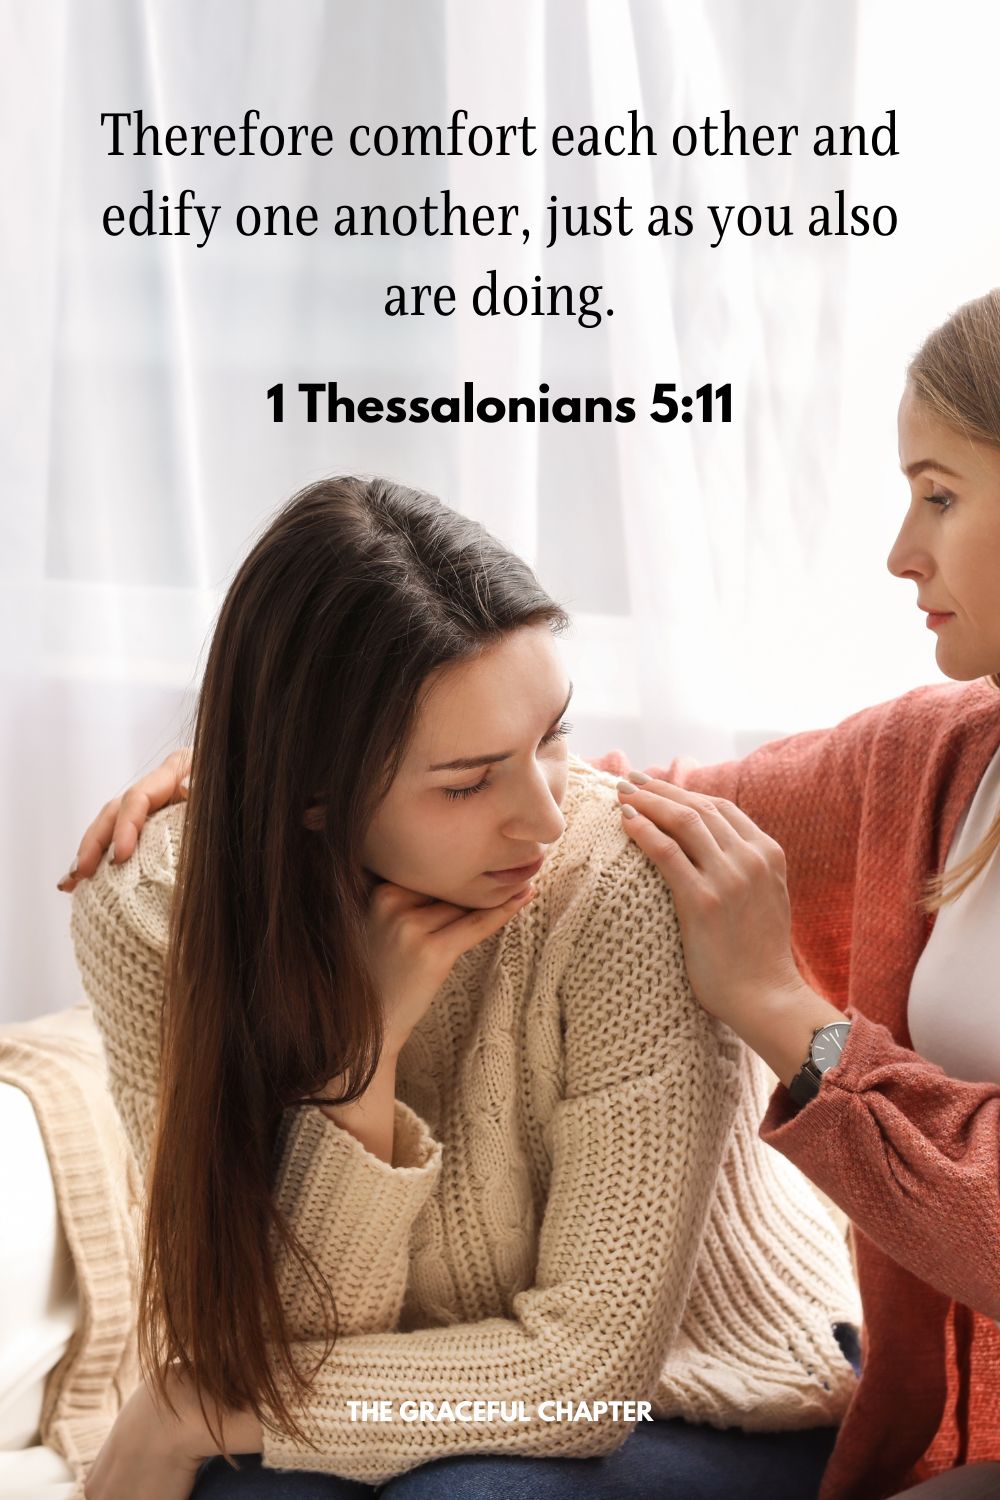 Therefore comfort each other and edify one another, just as you also are doing.1 Thessalonians 5:11